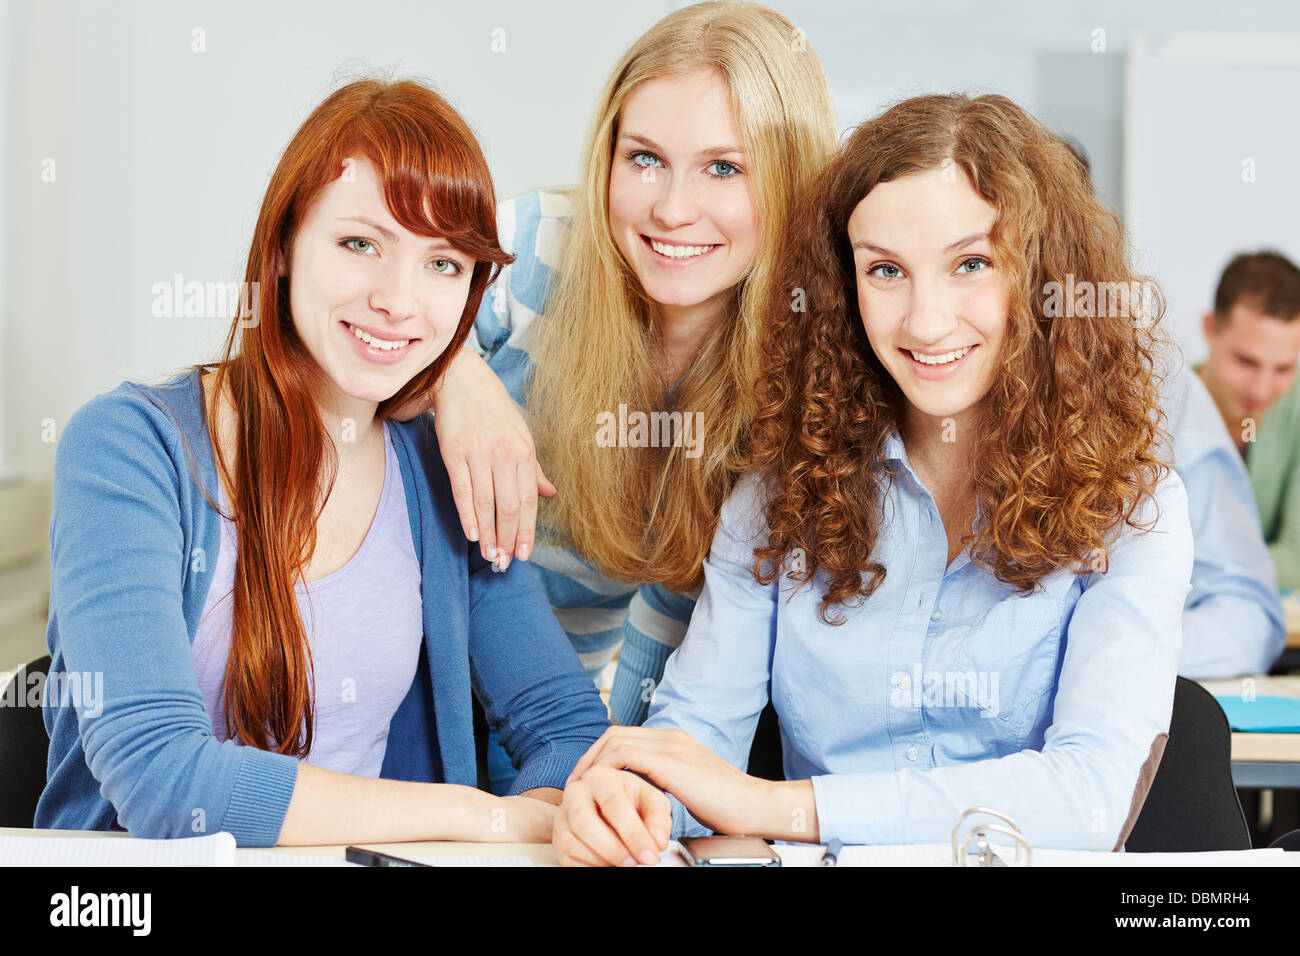 Three young happy attractive women in university class Stock Photo